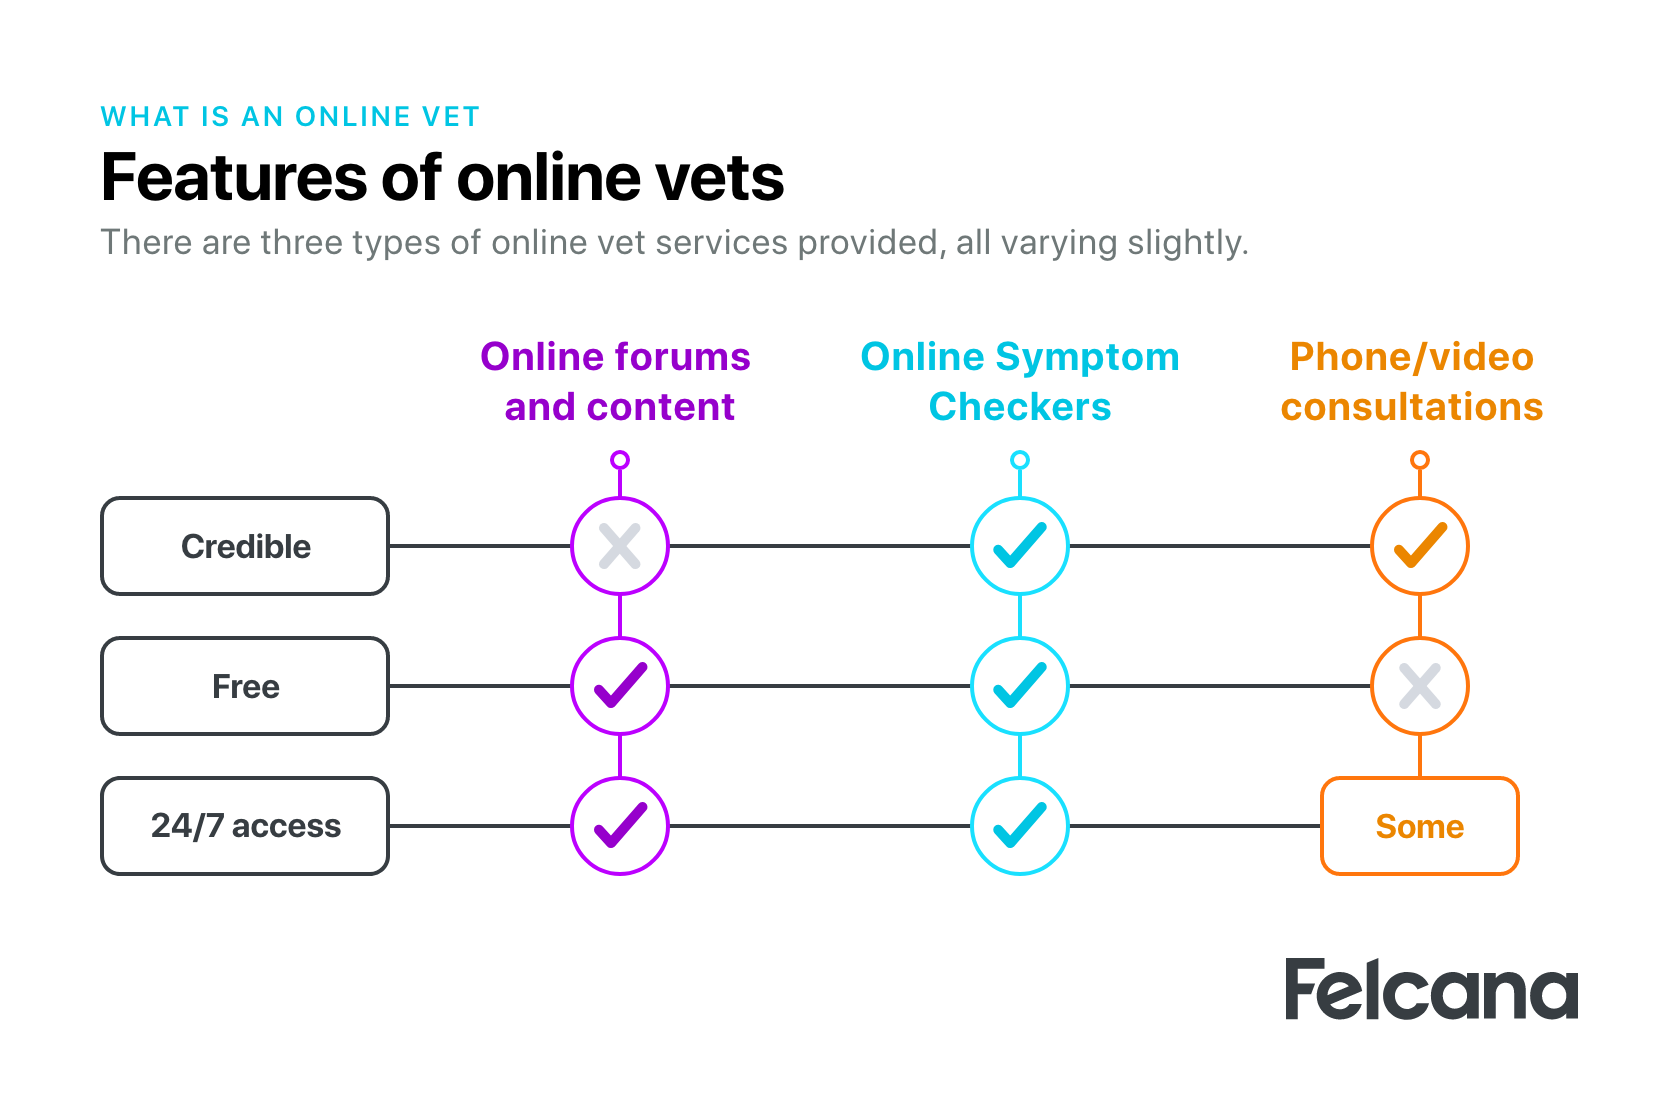 Features of 3 different types of online vets (online forums and content, online symptom checkers and phone/video consultations) and how they vary